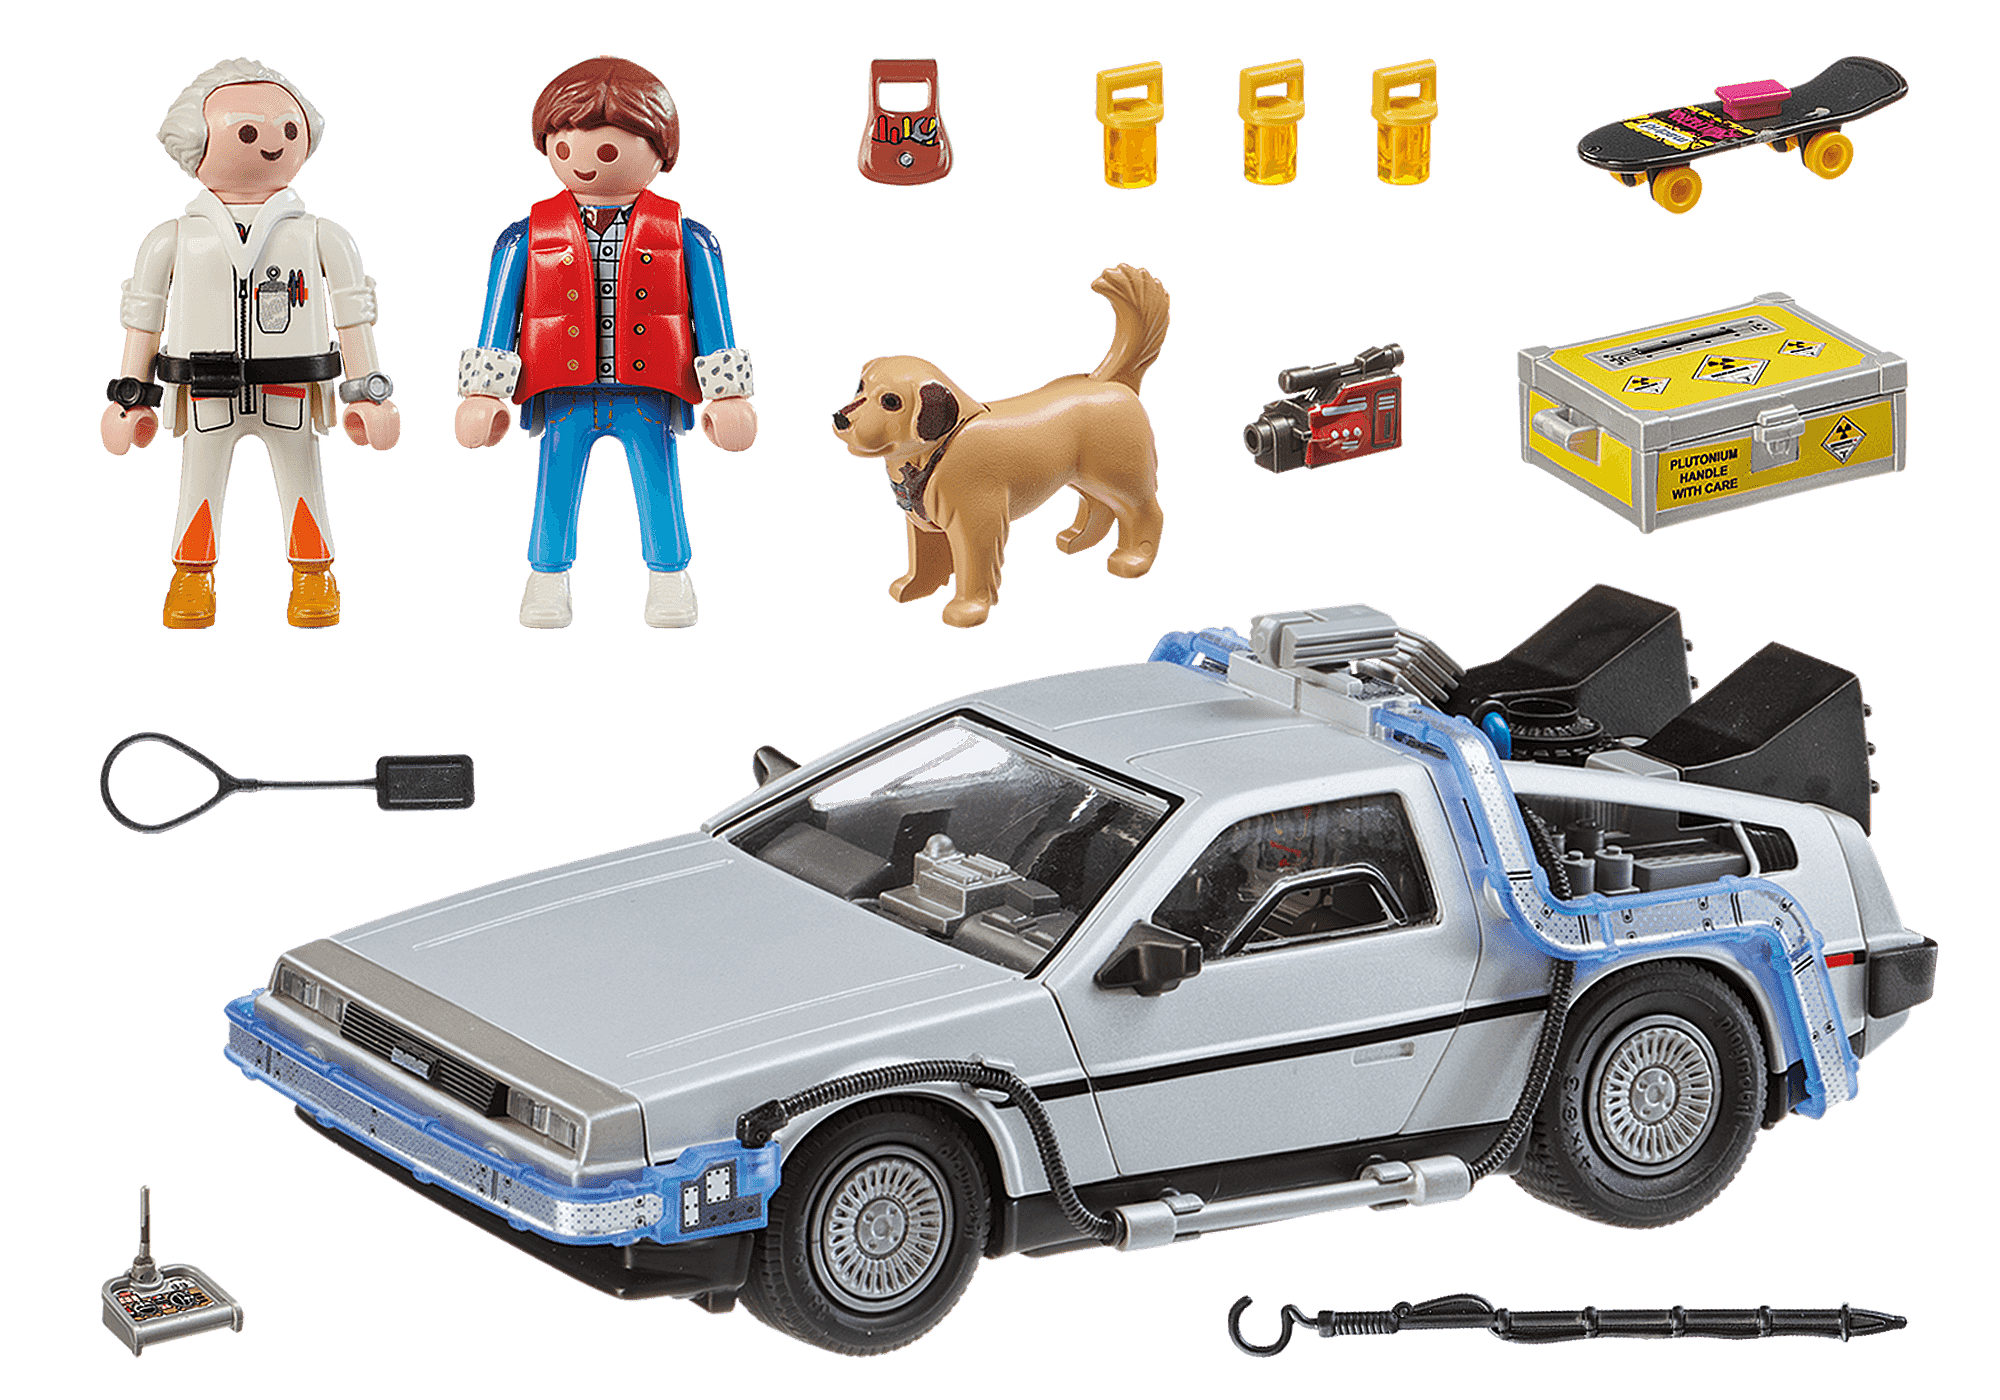 Angeschaut: Playmobil Back to the Future DeLorean